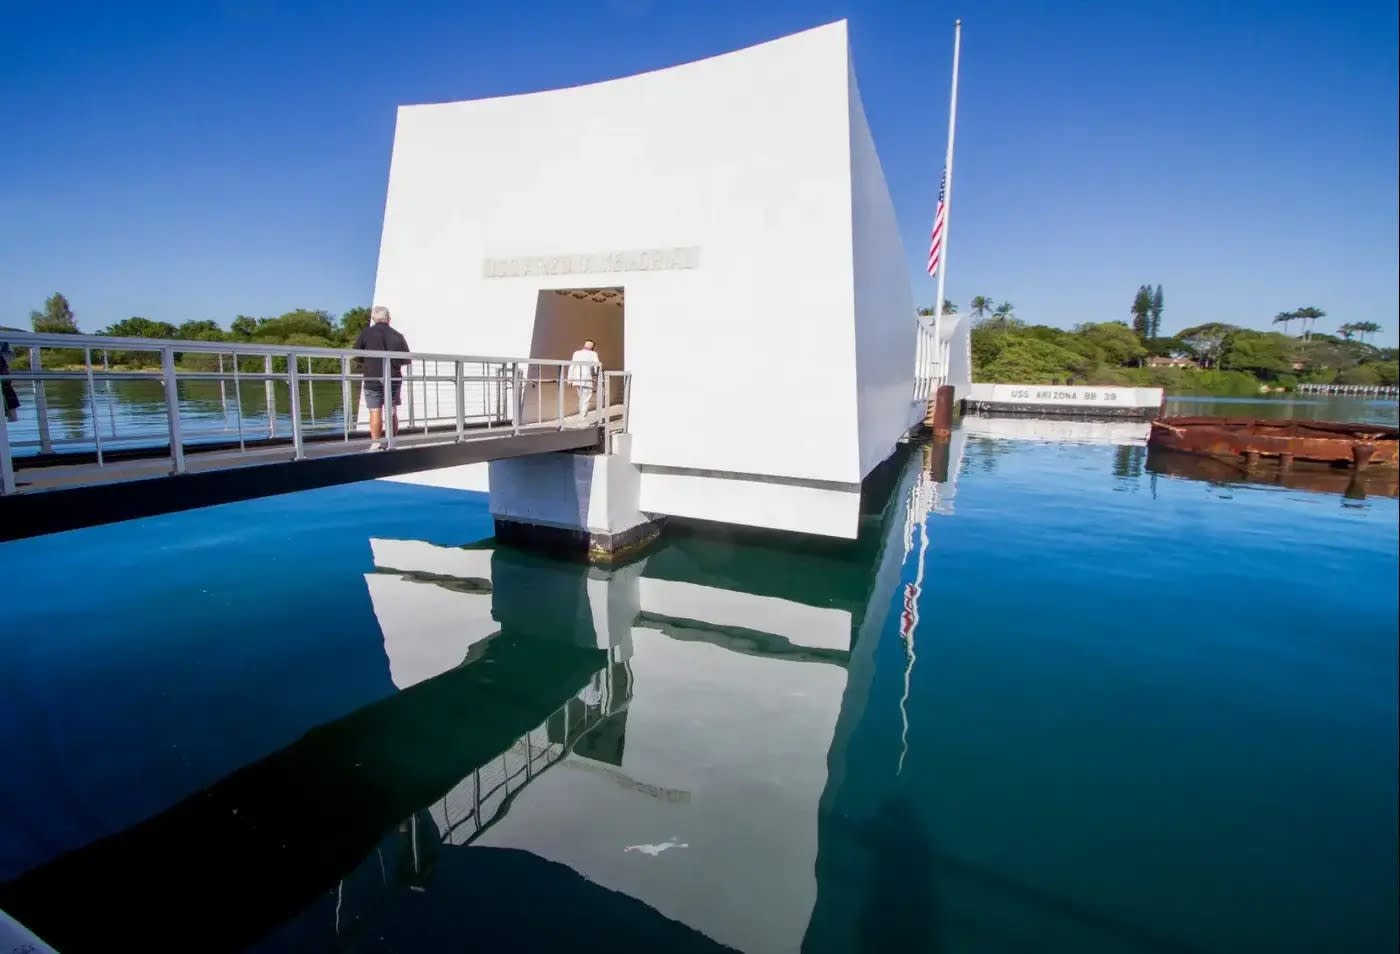  The monument to the victims of the Japanese attack on Pearl Harbor (credit: AP)